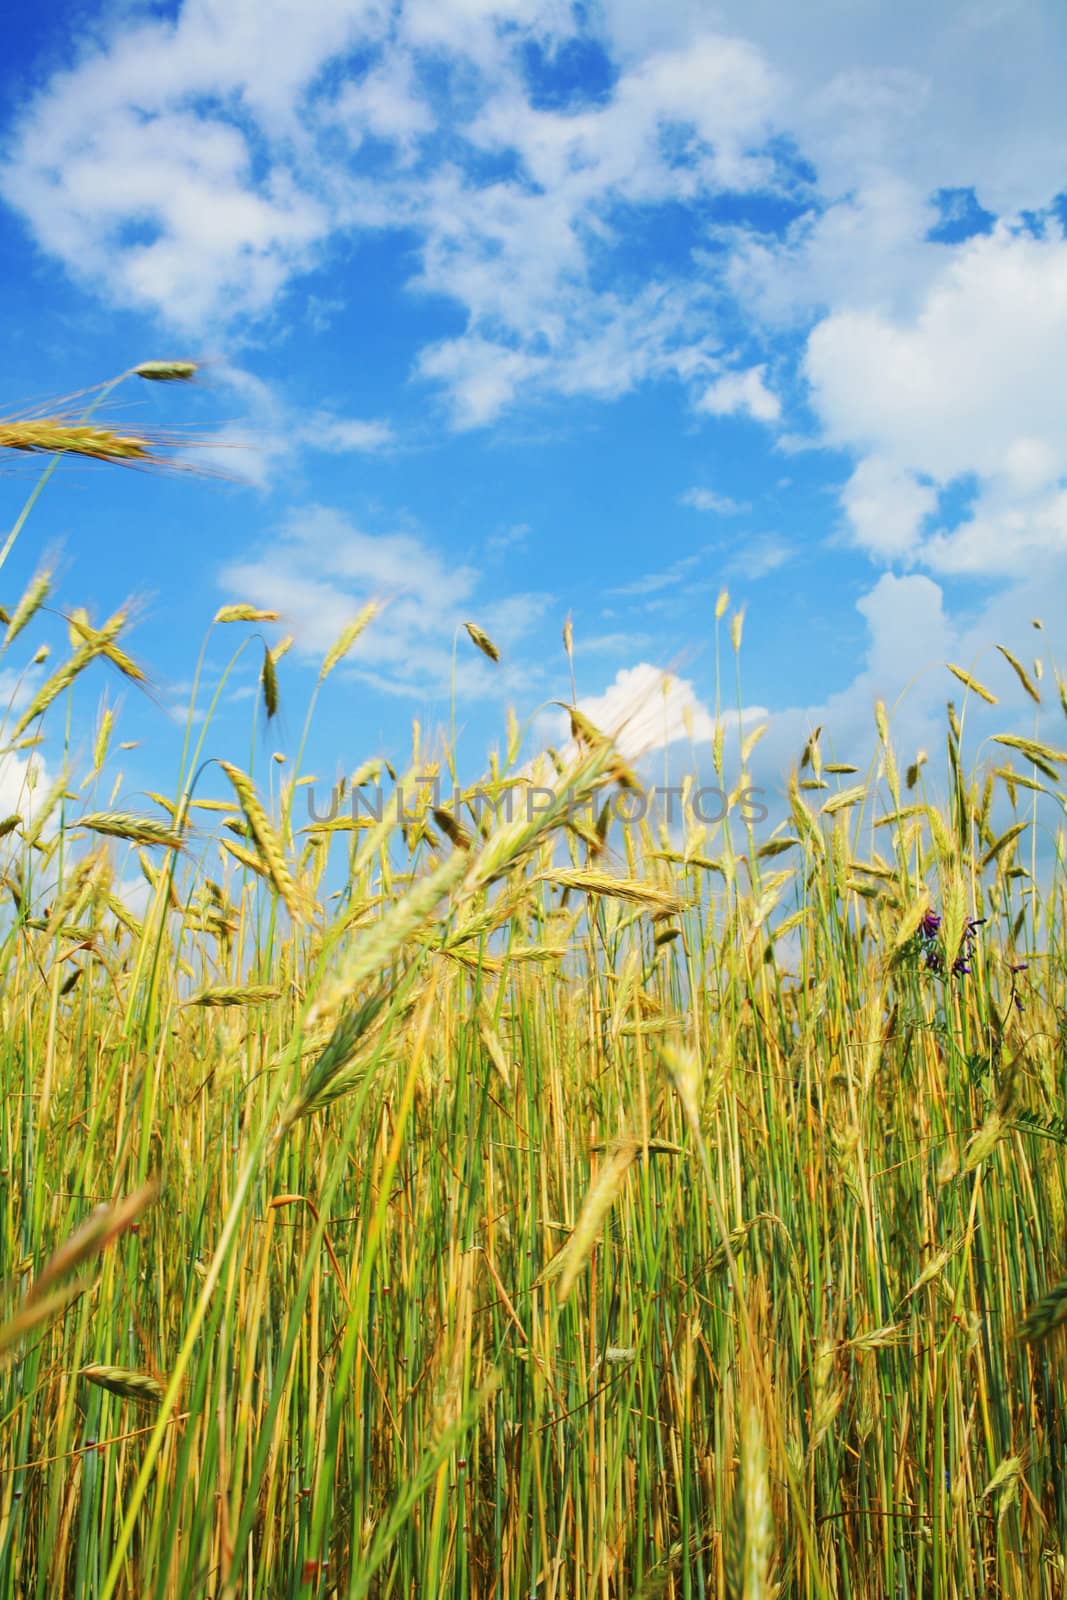 Stock photo: an image of yellow field of wheat and blue sky